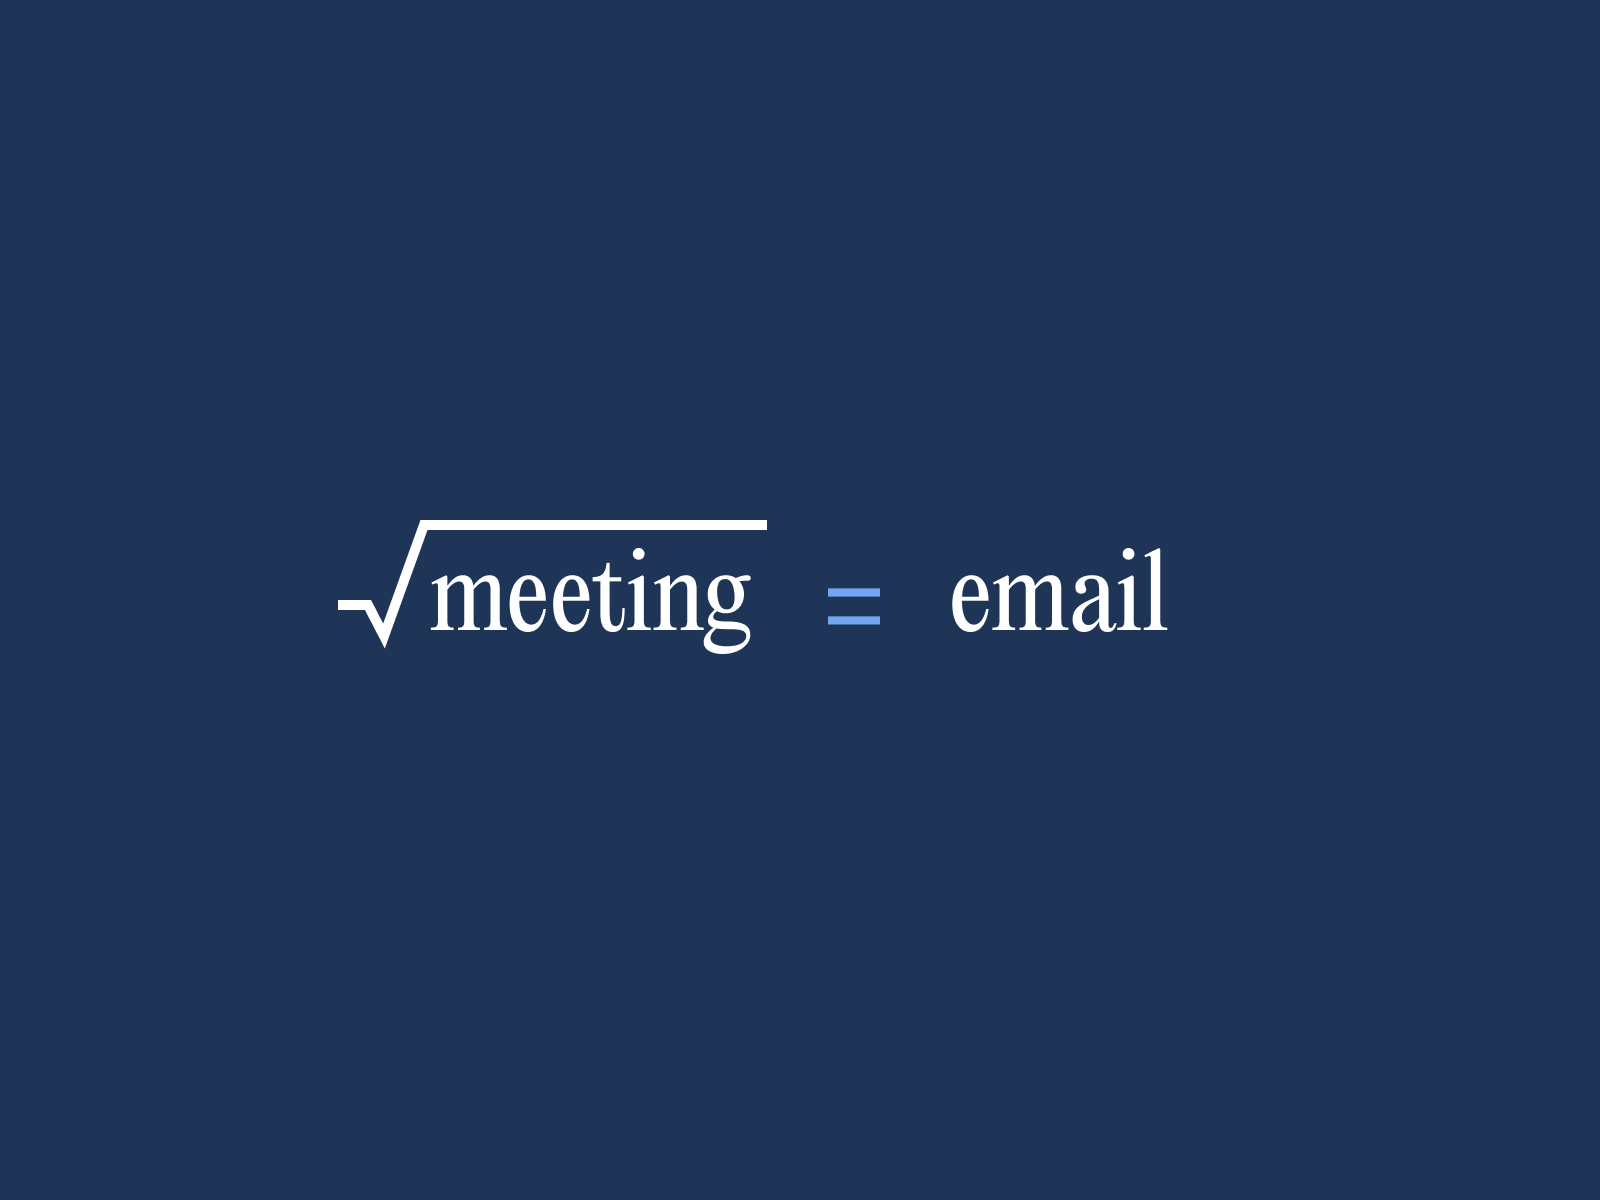 square root of meeting = email